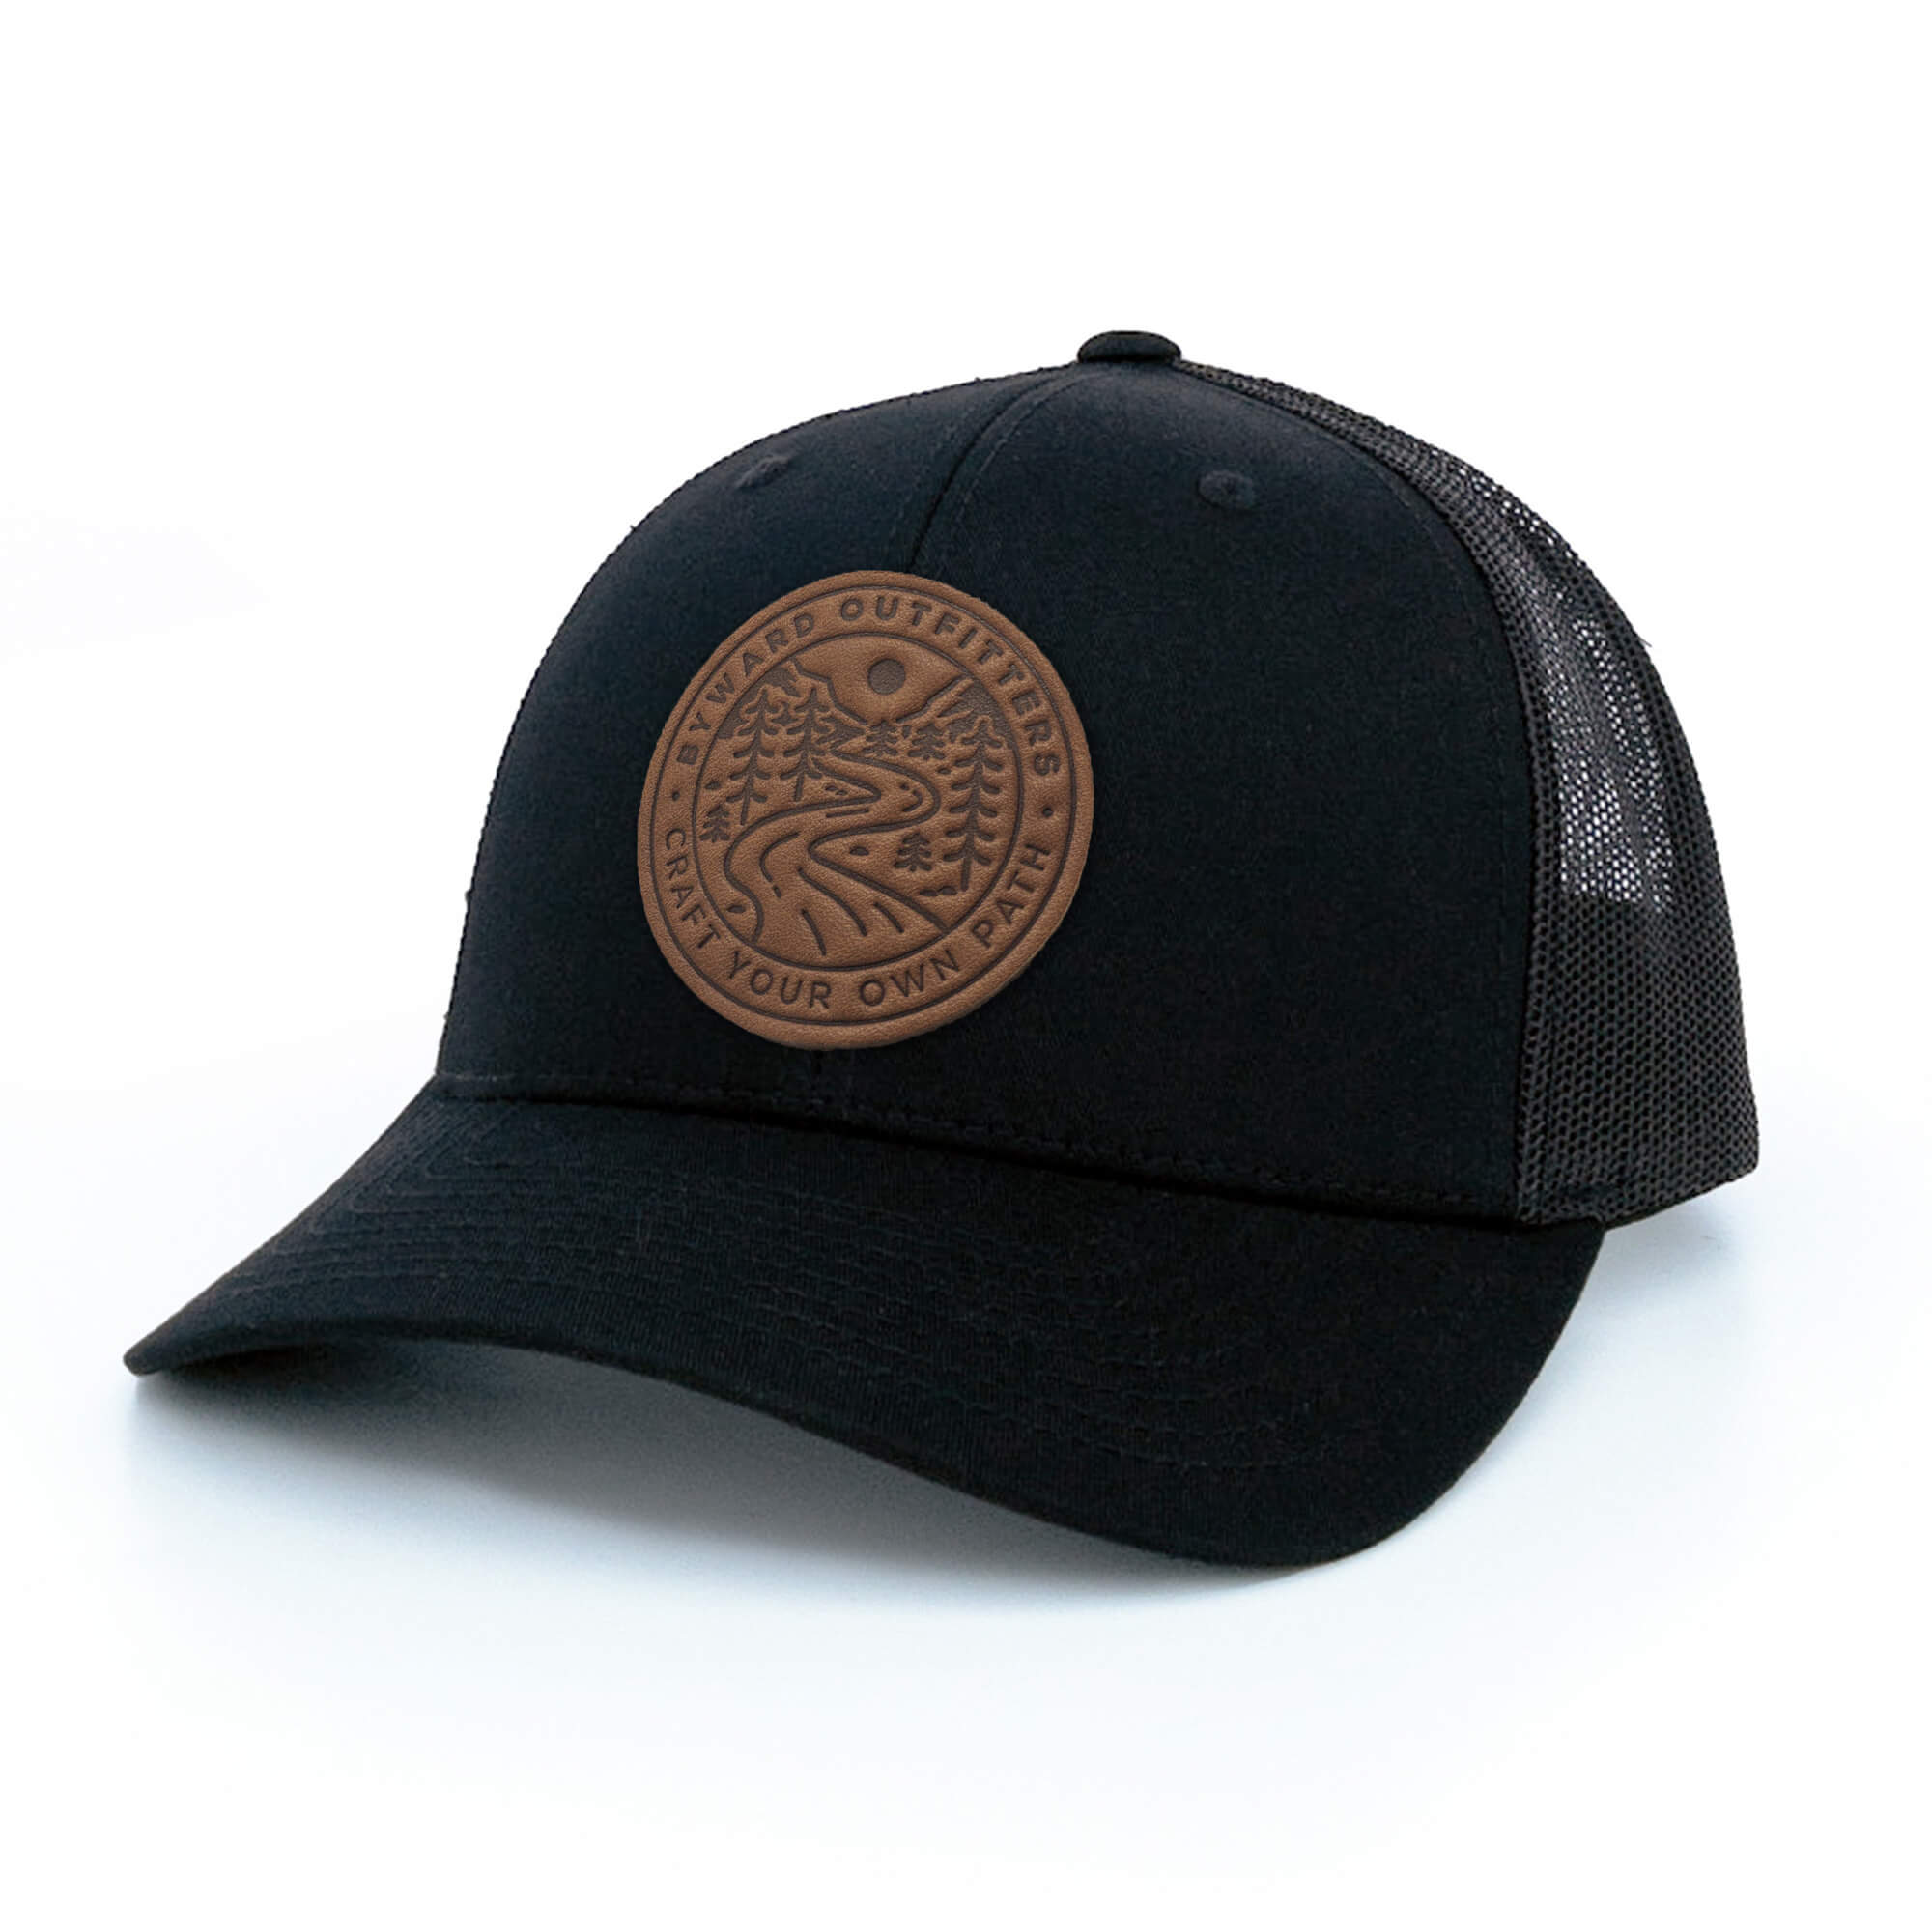 Black trucker hat with full-grain leather patch of Winding Wilderness | BLACK-005-004, CHARC-005-004, NAVY-005-004, HGREY-005-004, MOSS-005-004, BROWN-005-004